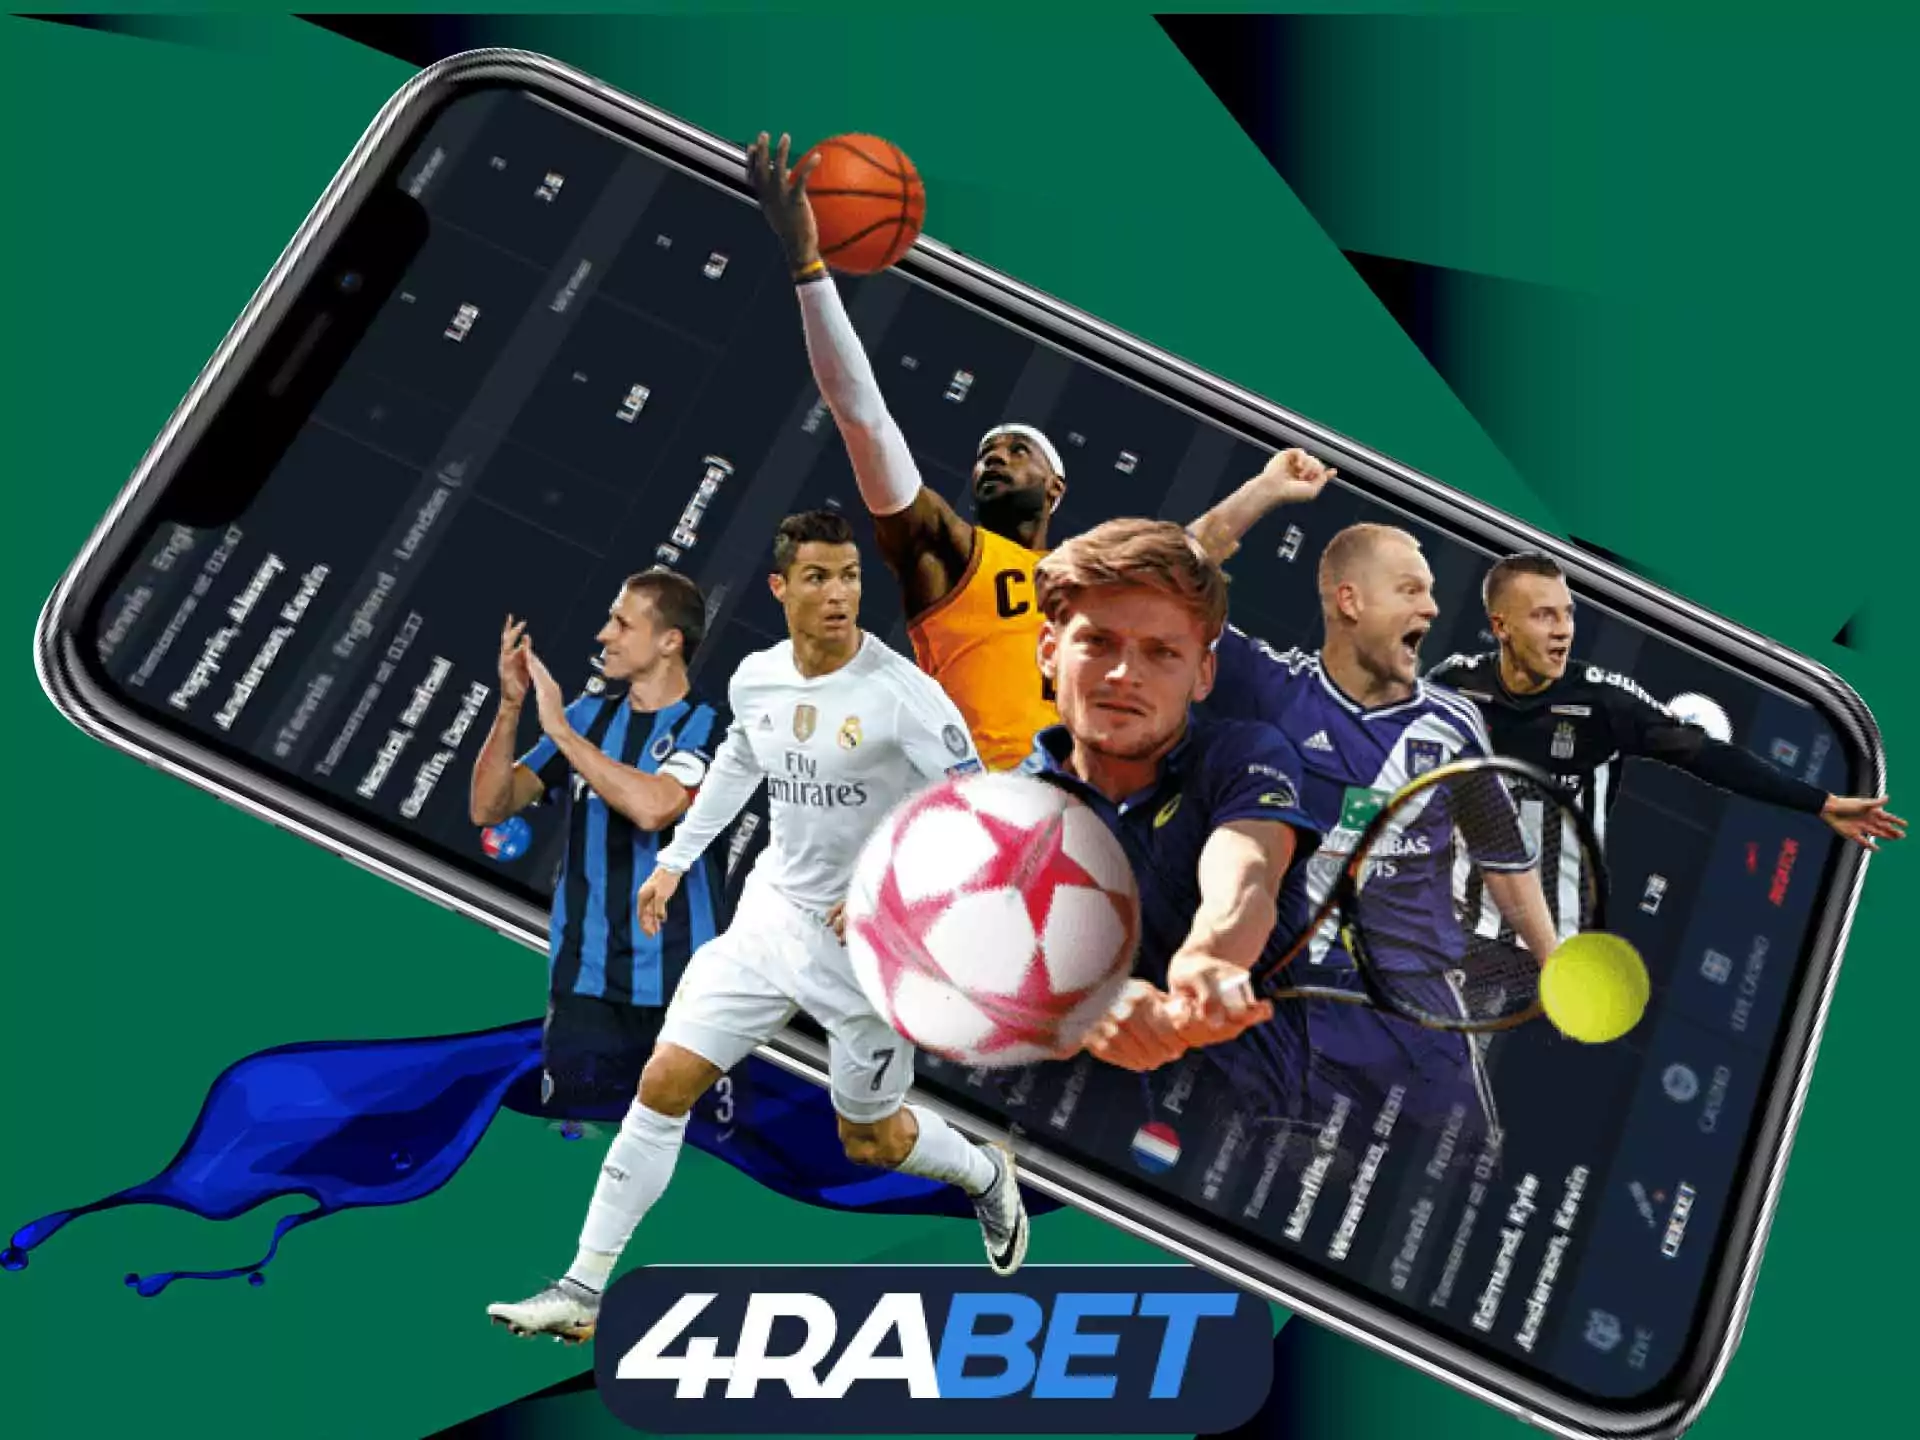 Place bet on the best player of the match in the Mostbet app.